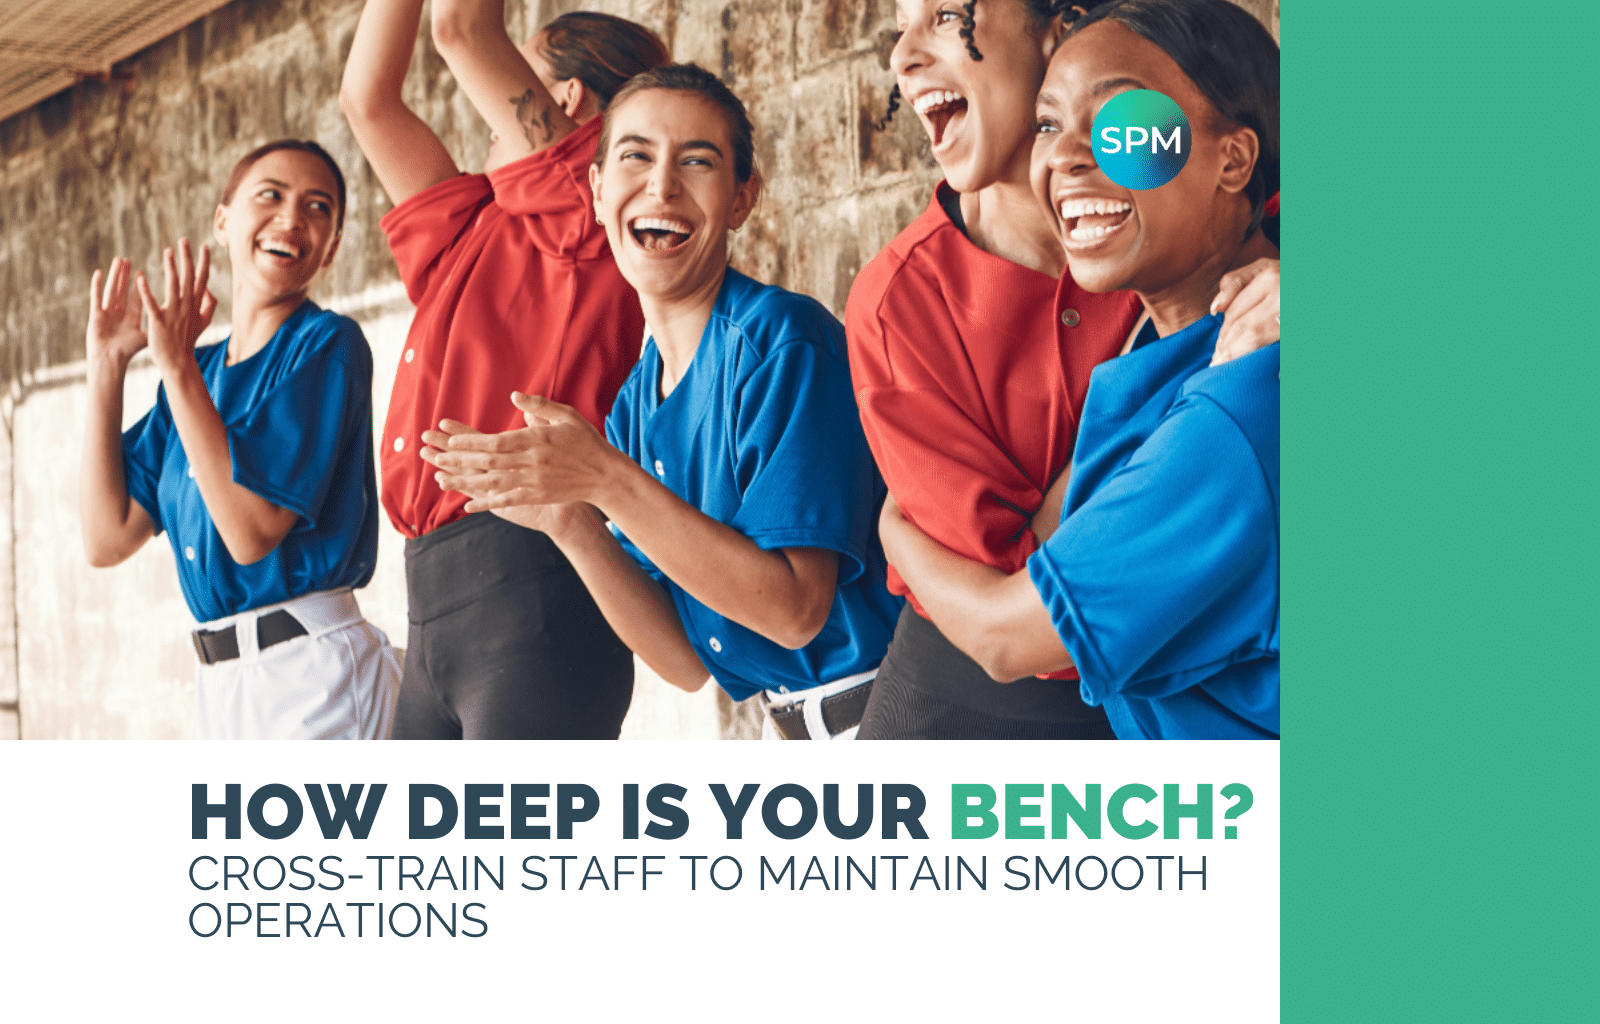 How Deep Is Your Bench Cross-train staff to maintain smooth operations